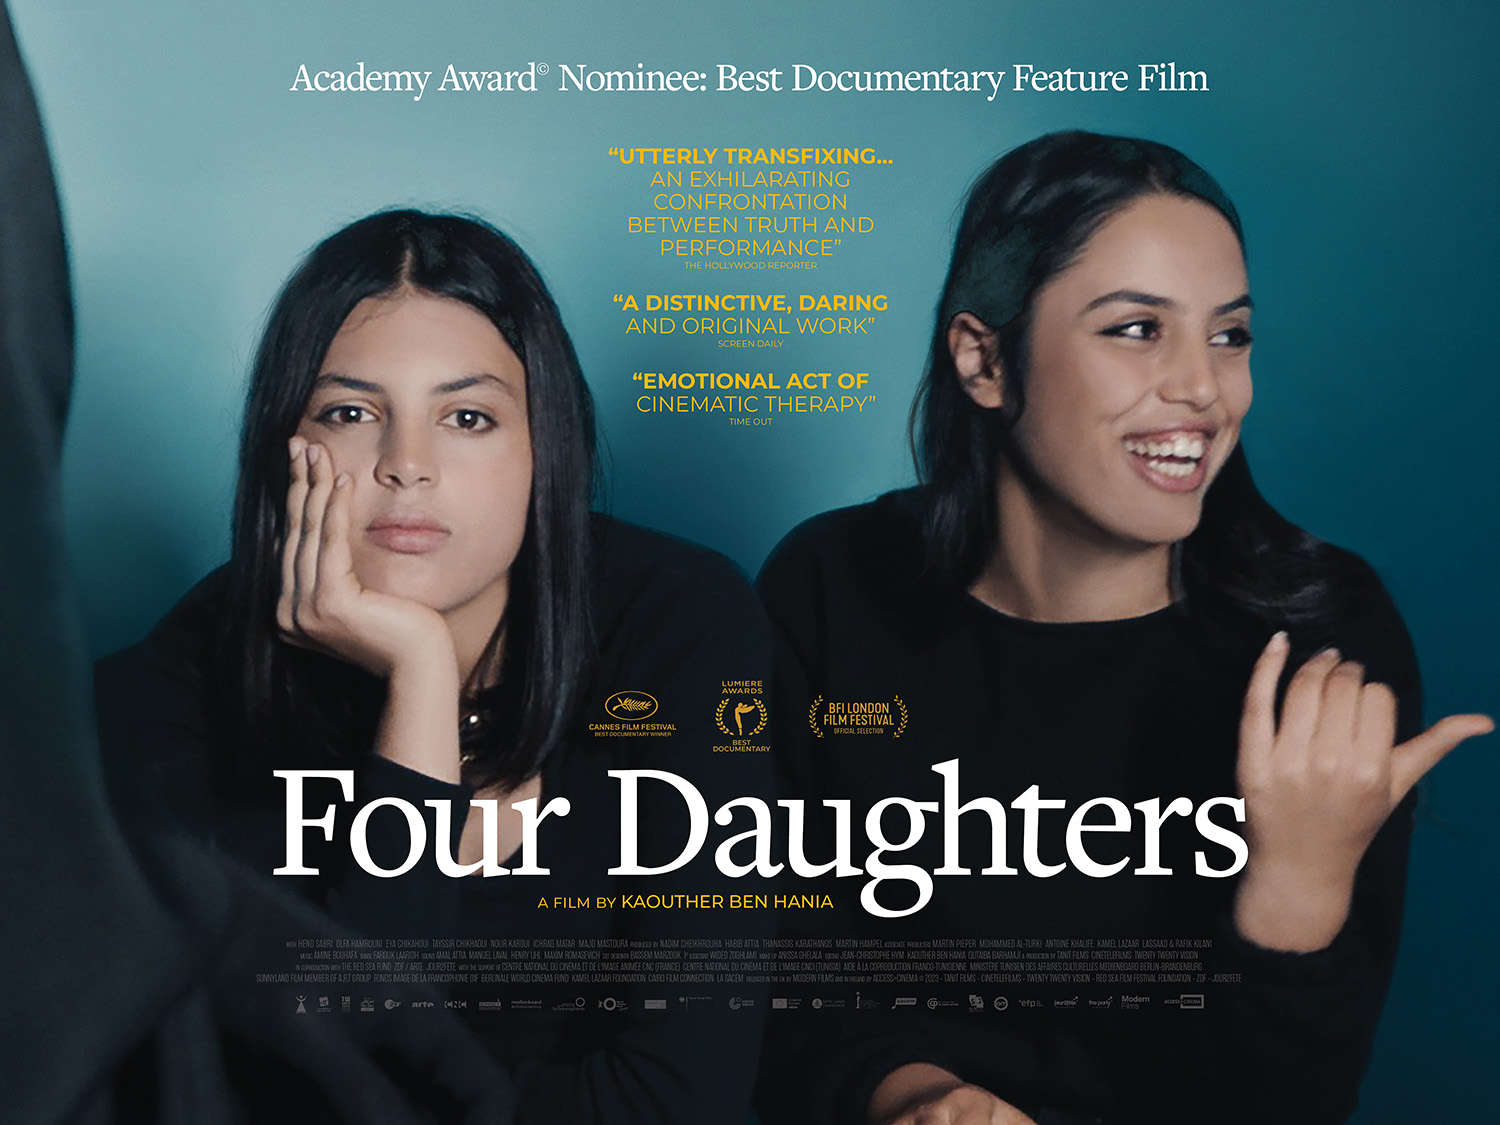 Poster for the film Four Daughters, showing one frowning young woman on the left and a laughing young woman on the right